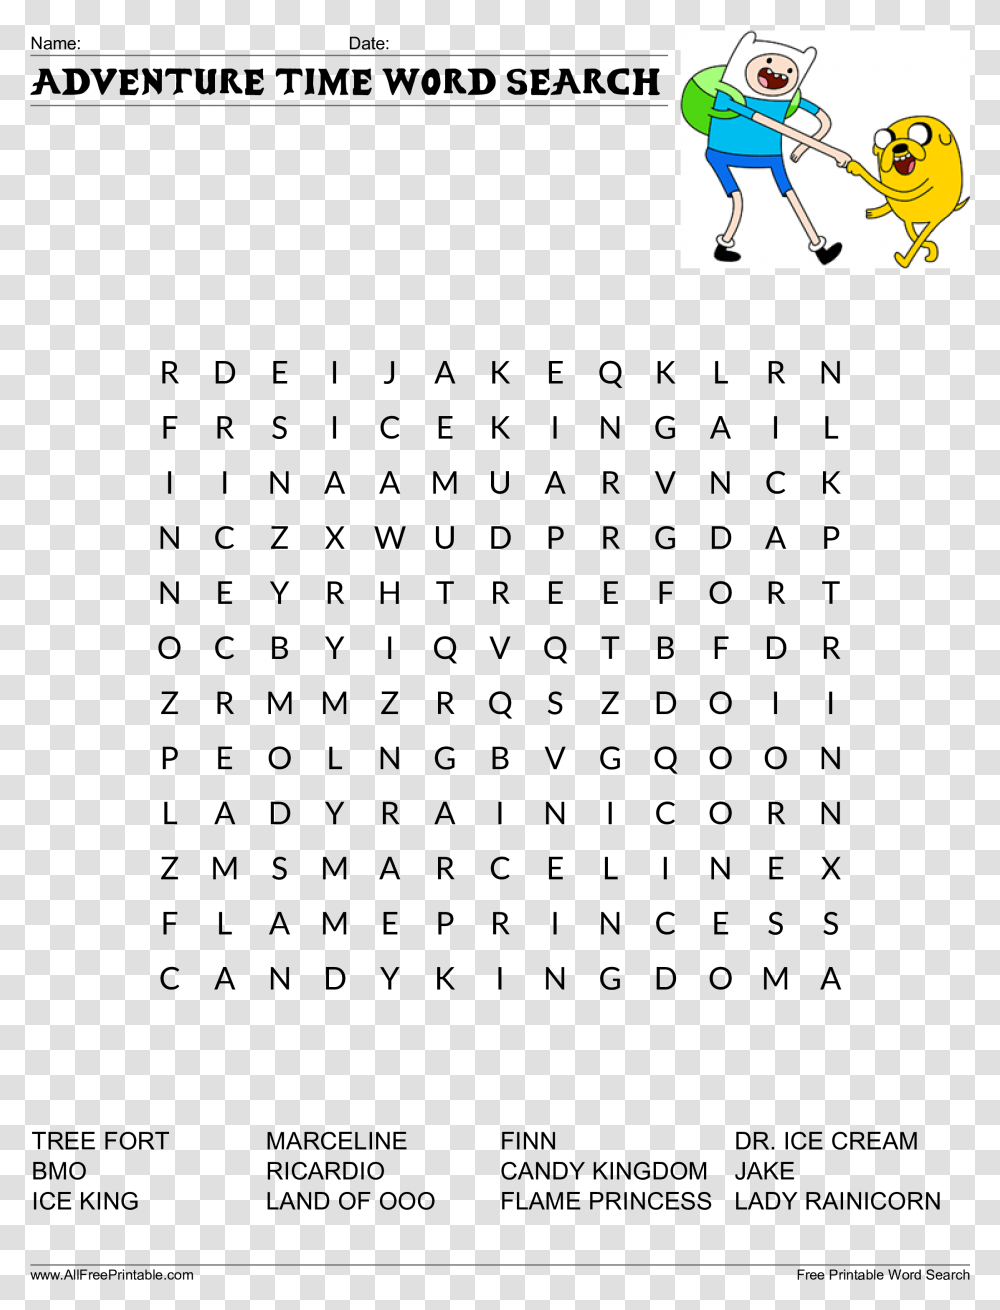 adventure time word search main image time word search printable person human gray transparent png pngset com